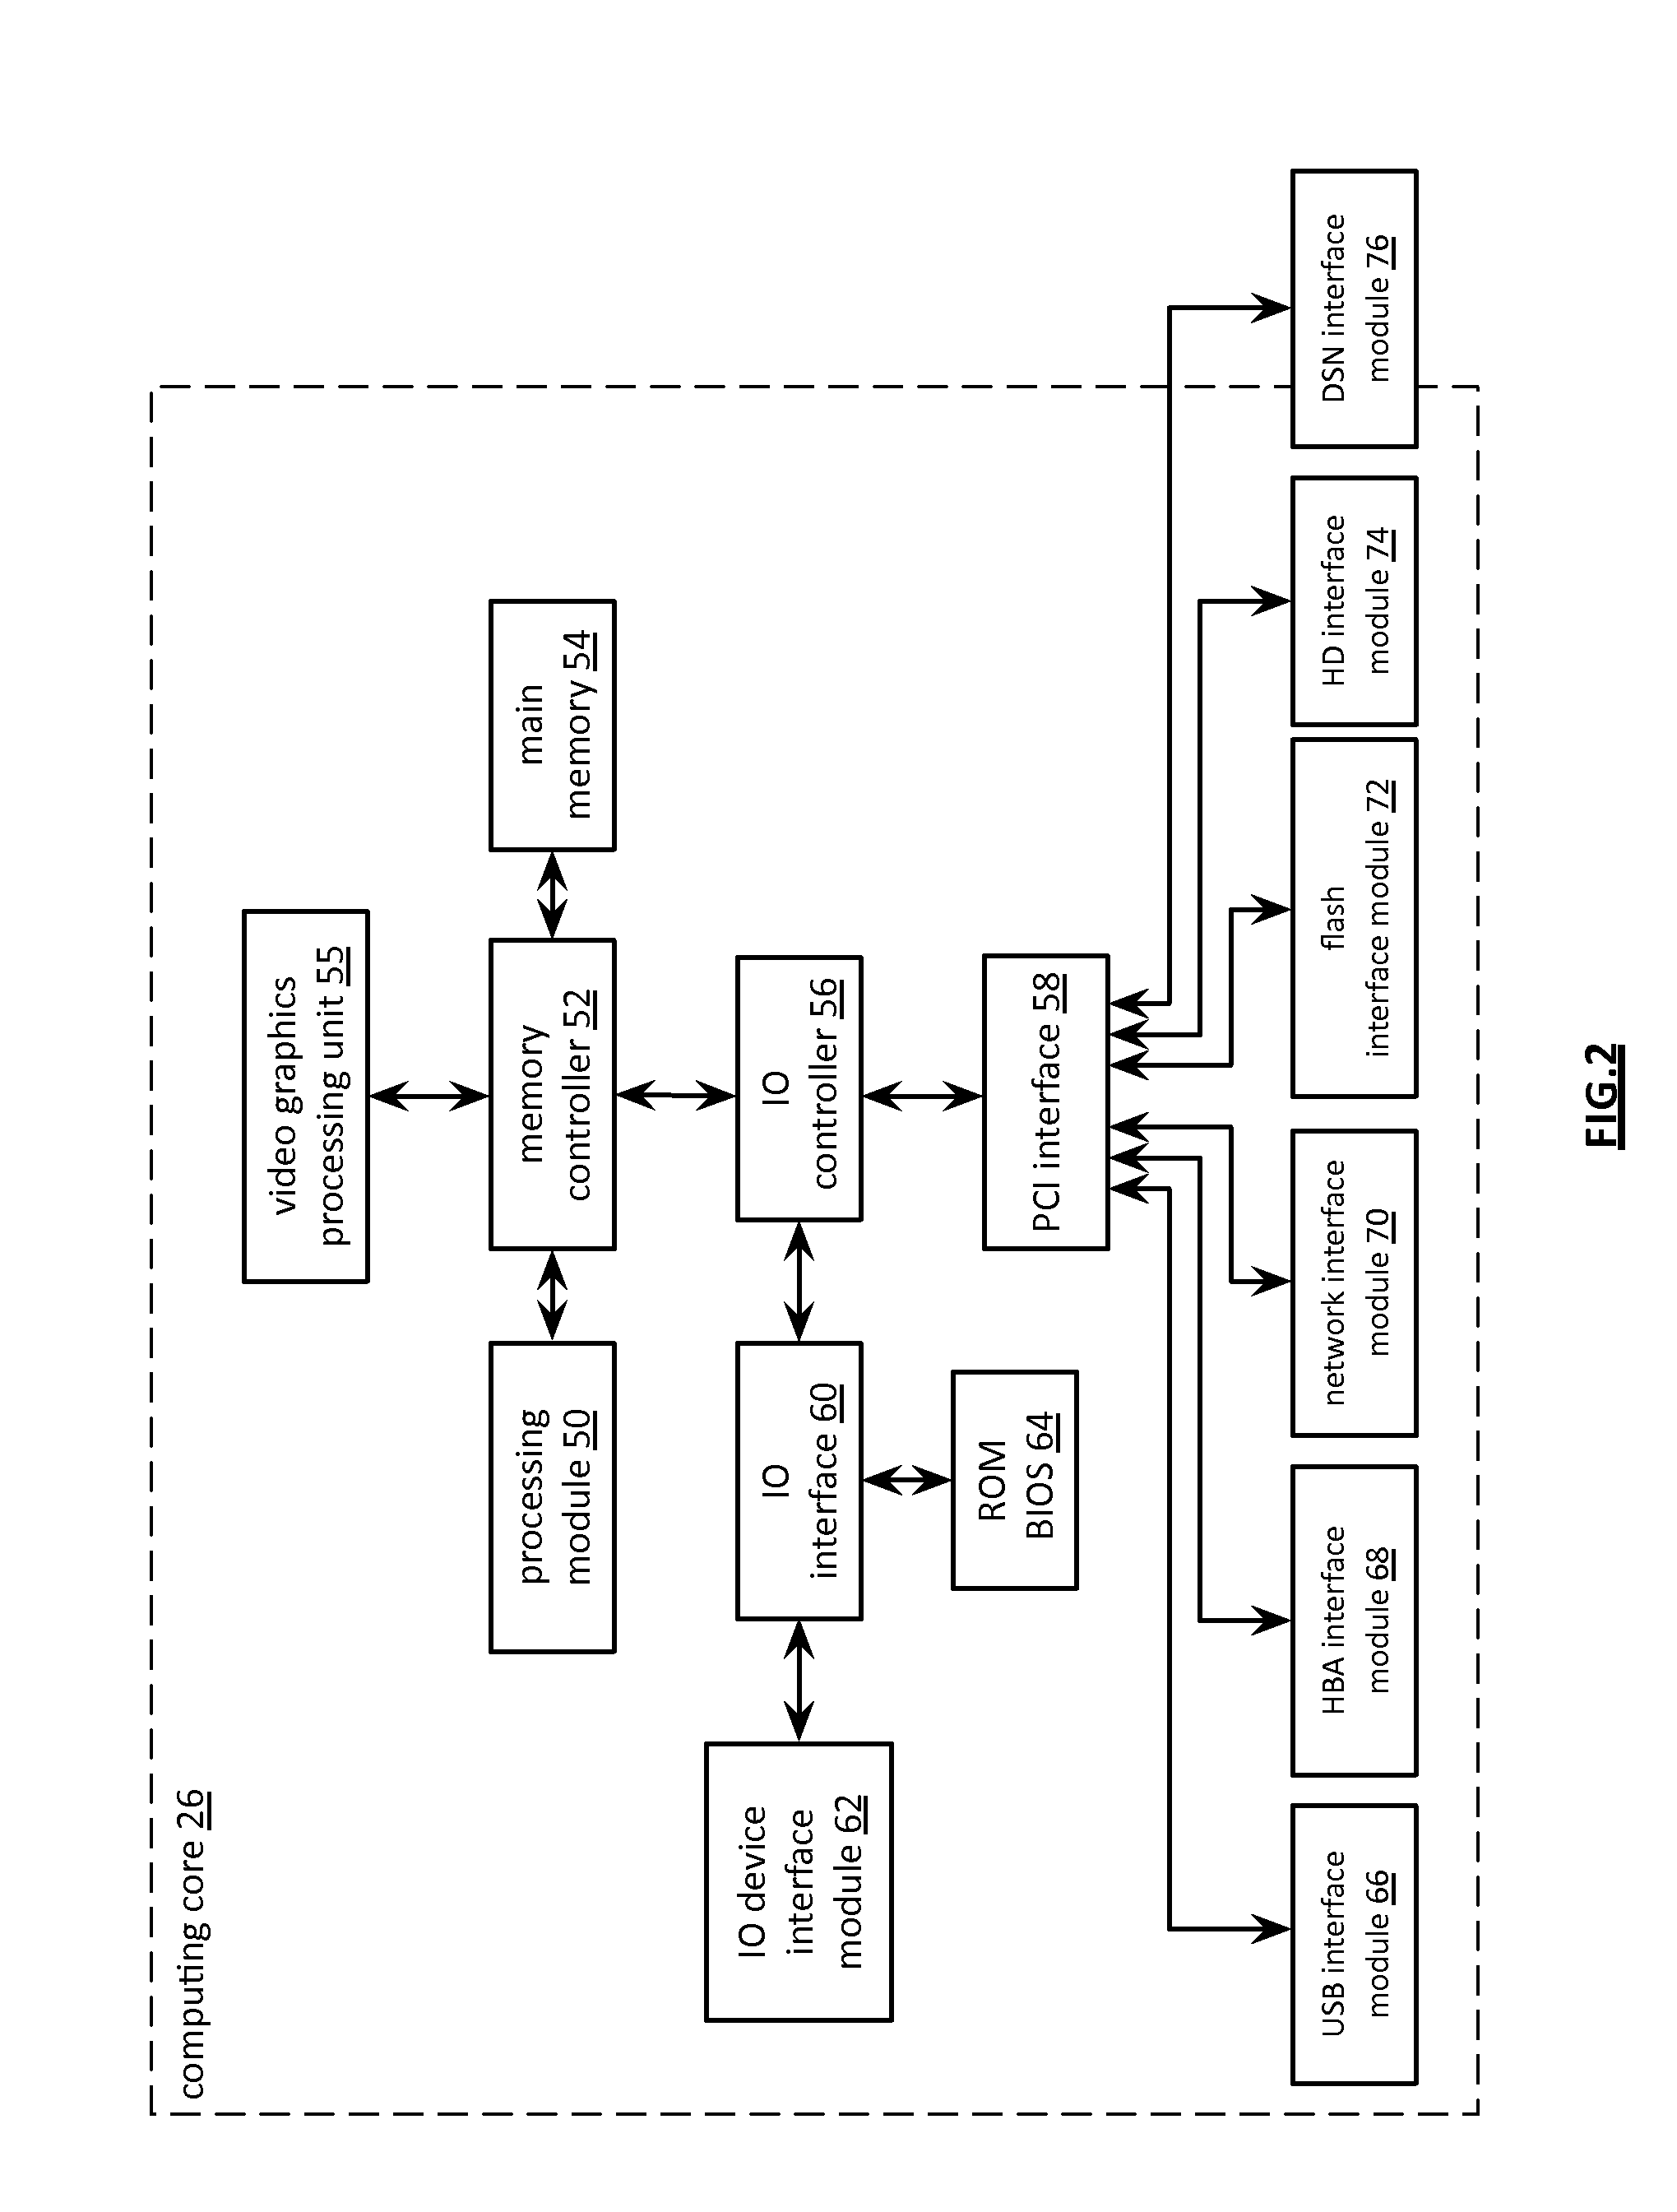 Coordinated retrieval of data from a dispersed storage network